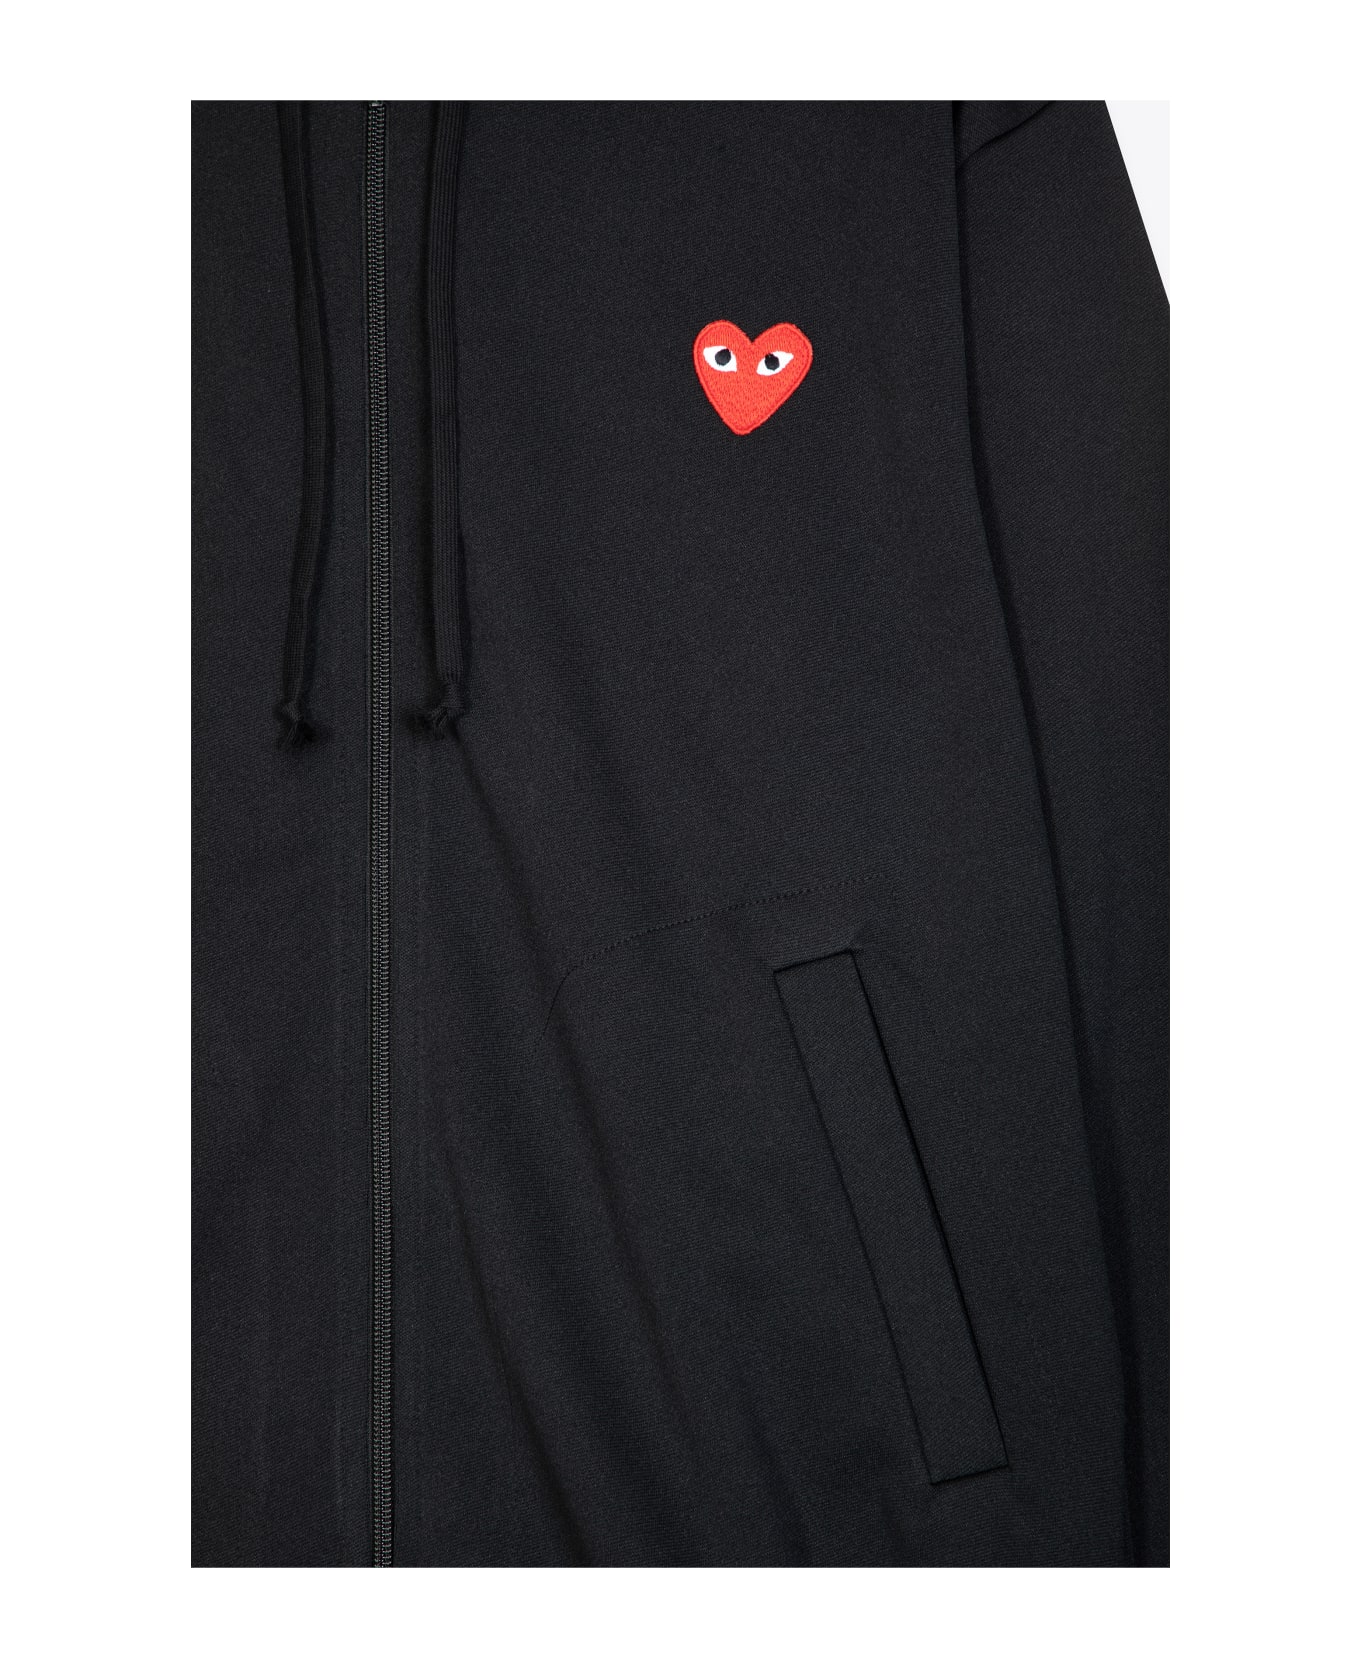 Comme des Garçons Play Mens Sweatshirt Knit Black hoodie with zip and heart patch at chest - Nero